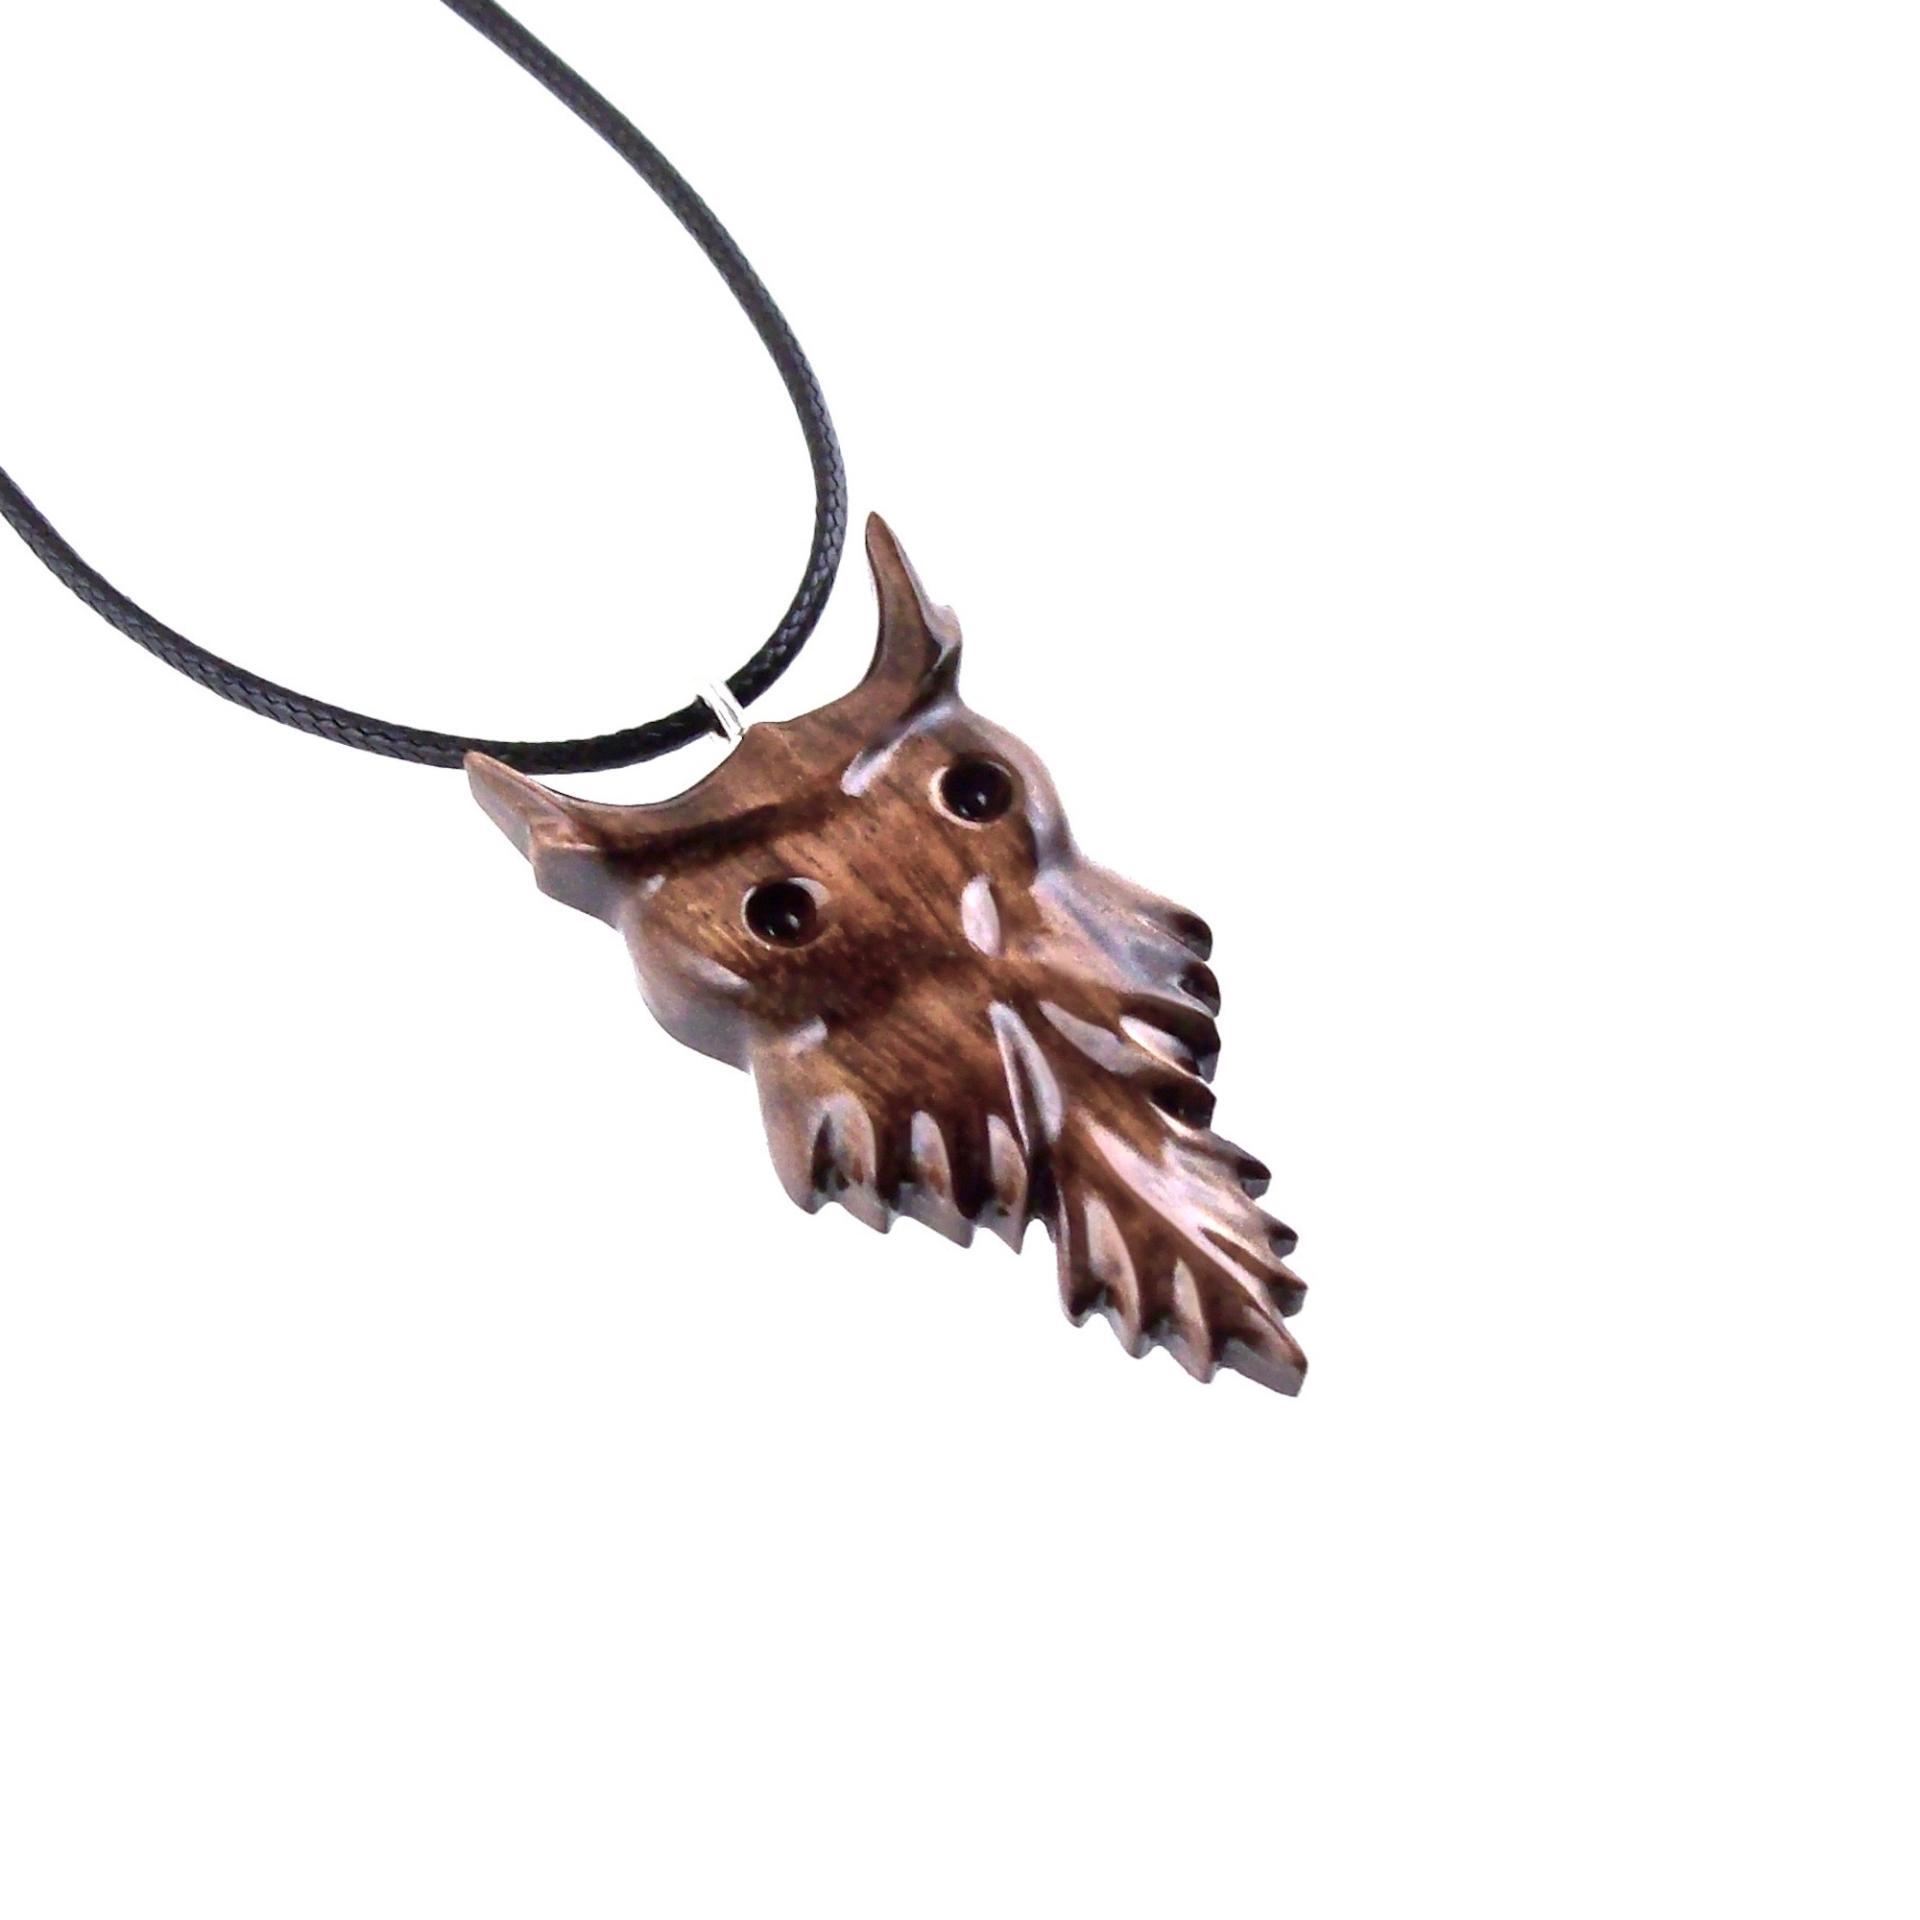 Owl Necklace, Wooden Owl Pendant, Hand Carved Bird Necklace, Wood Jewelry, Spirit Animal Totem One of a Kind Gift